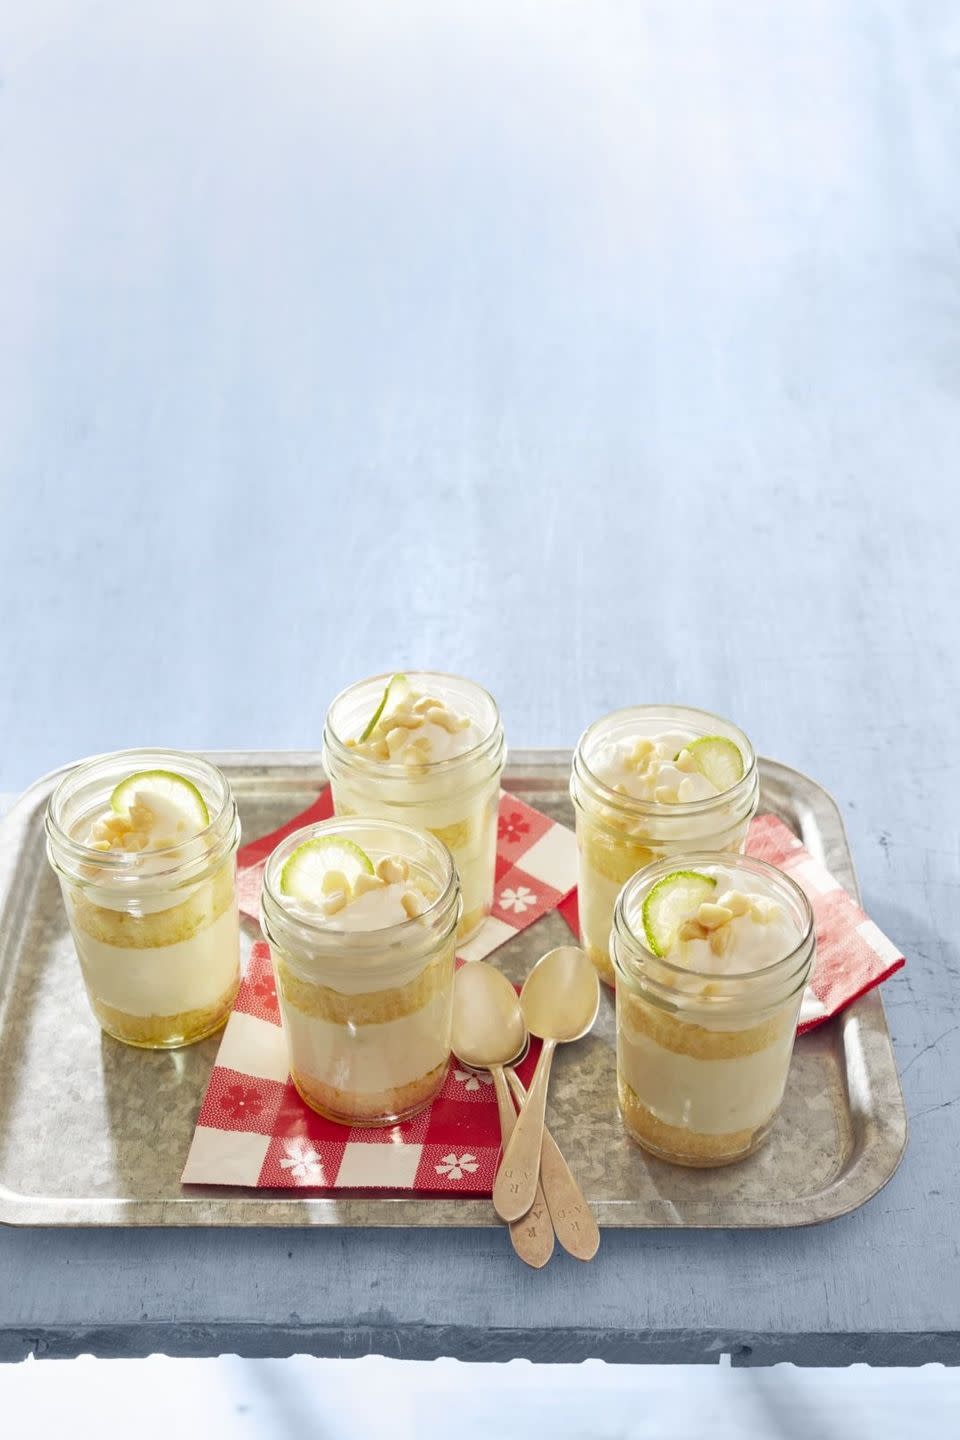 key lime cakes in a jar